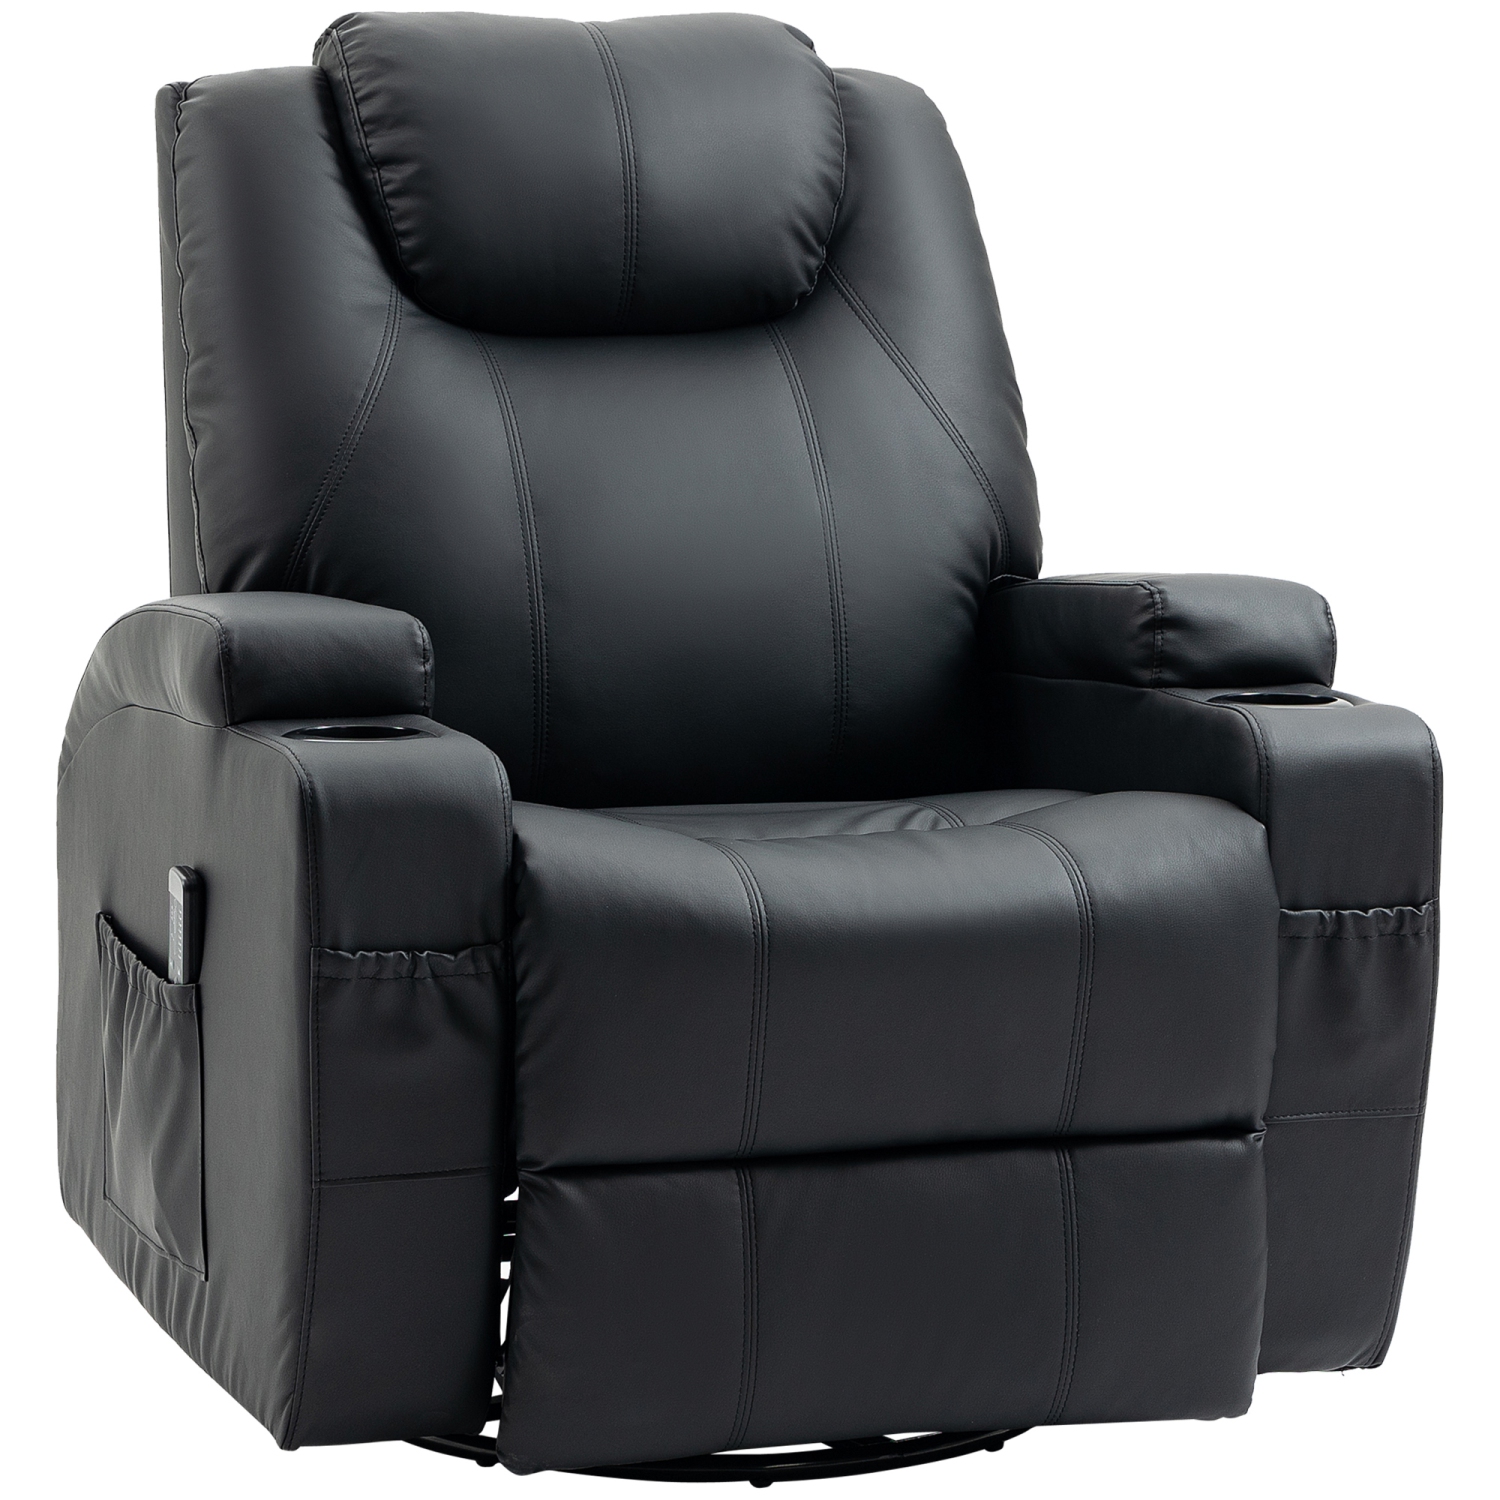 HOMCOM Faux Leather Recliner Chair with Massage, Vibration, Muti-function Padded Sofa Chair with Remote Control, 360 Degree Swivel Seat with Dual Cup Holders, Black